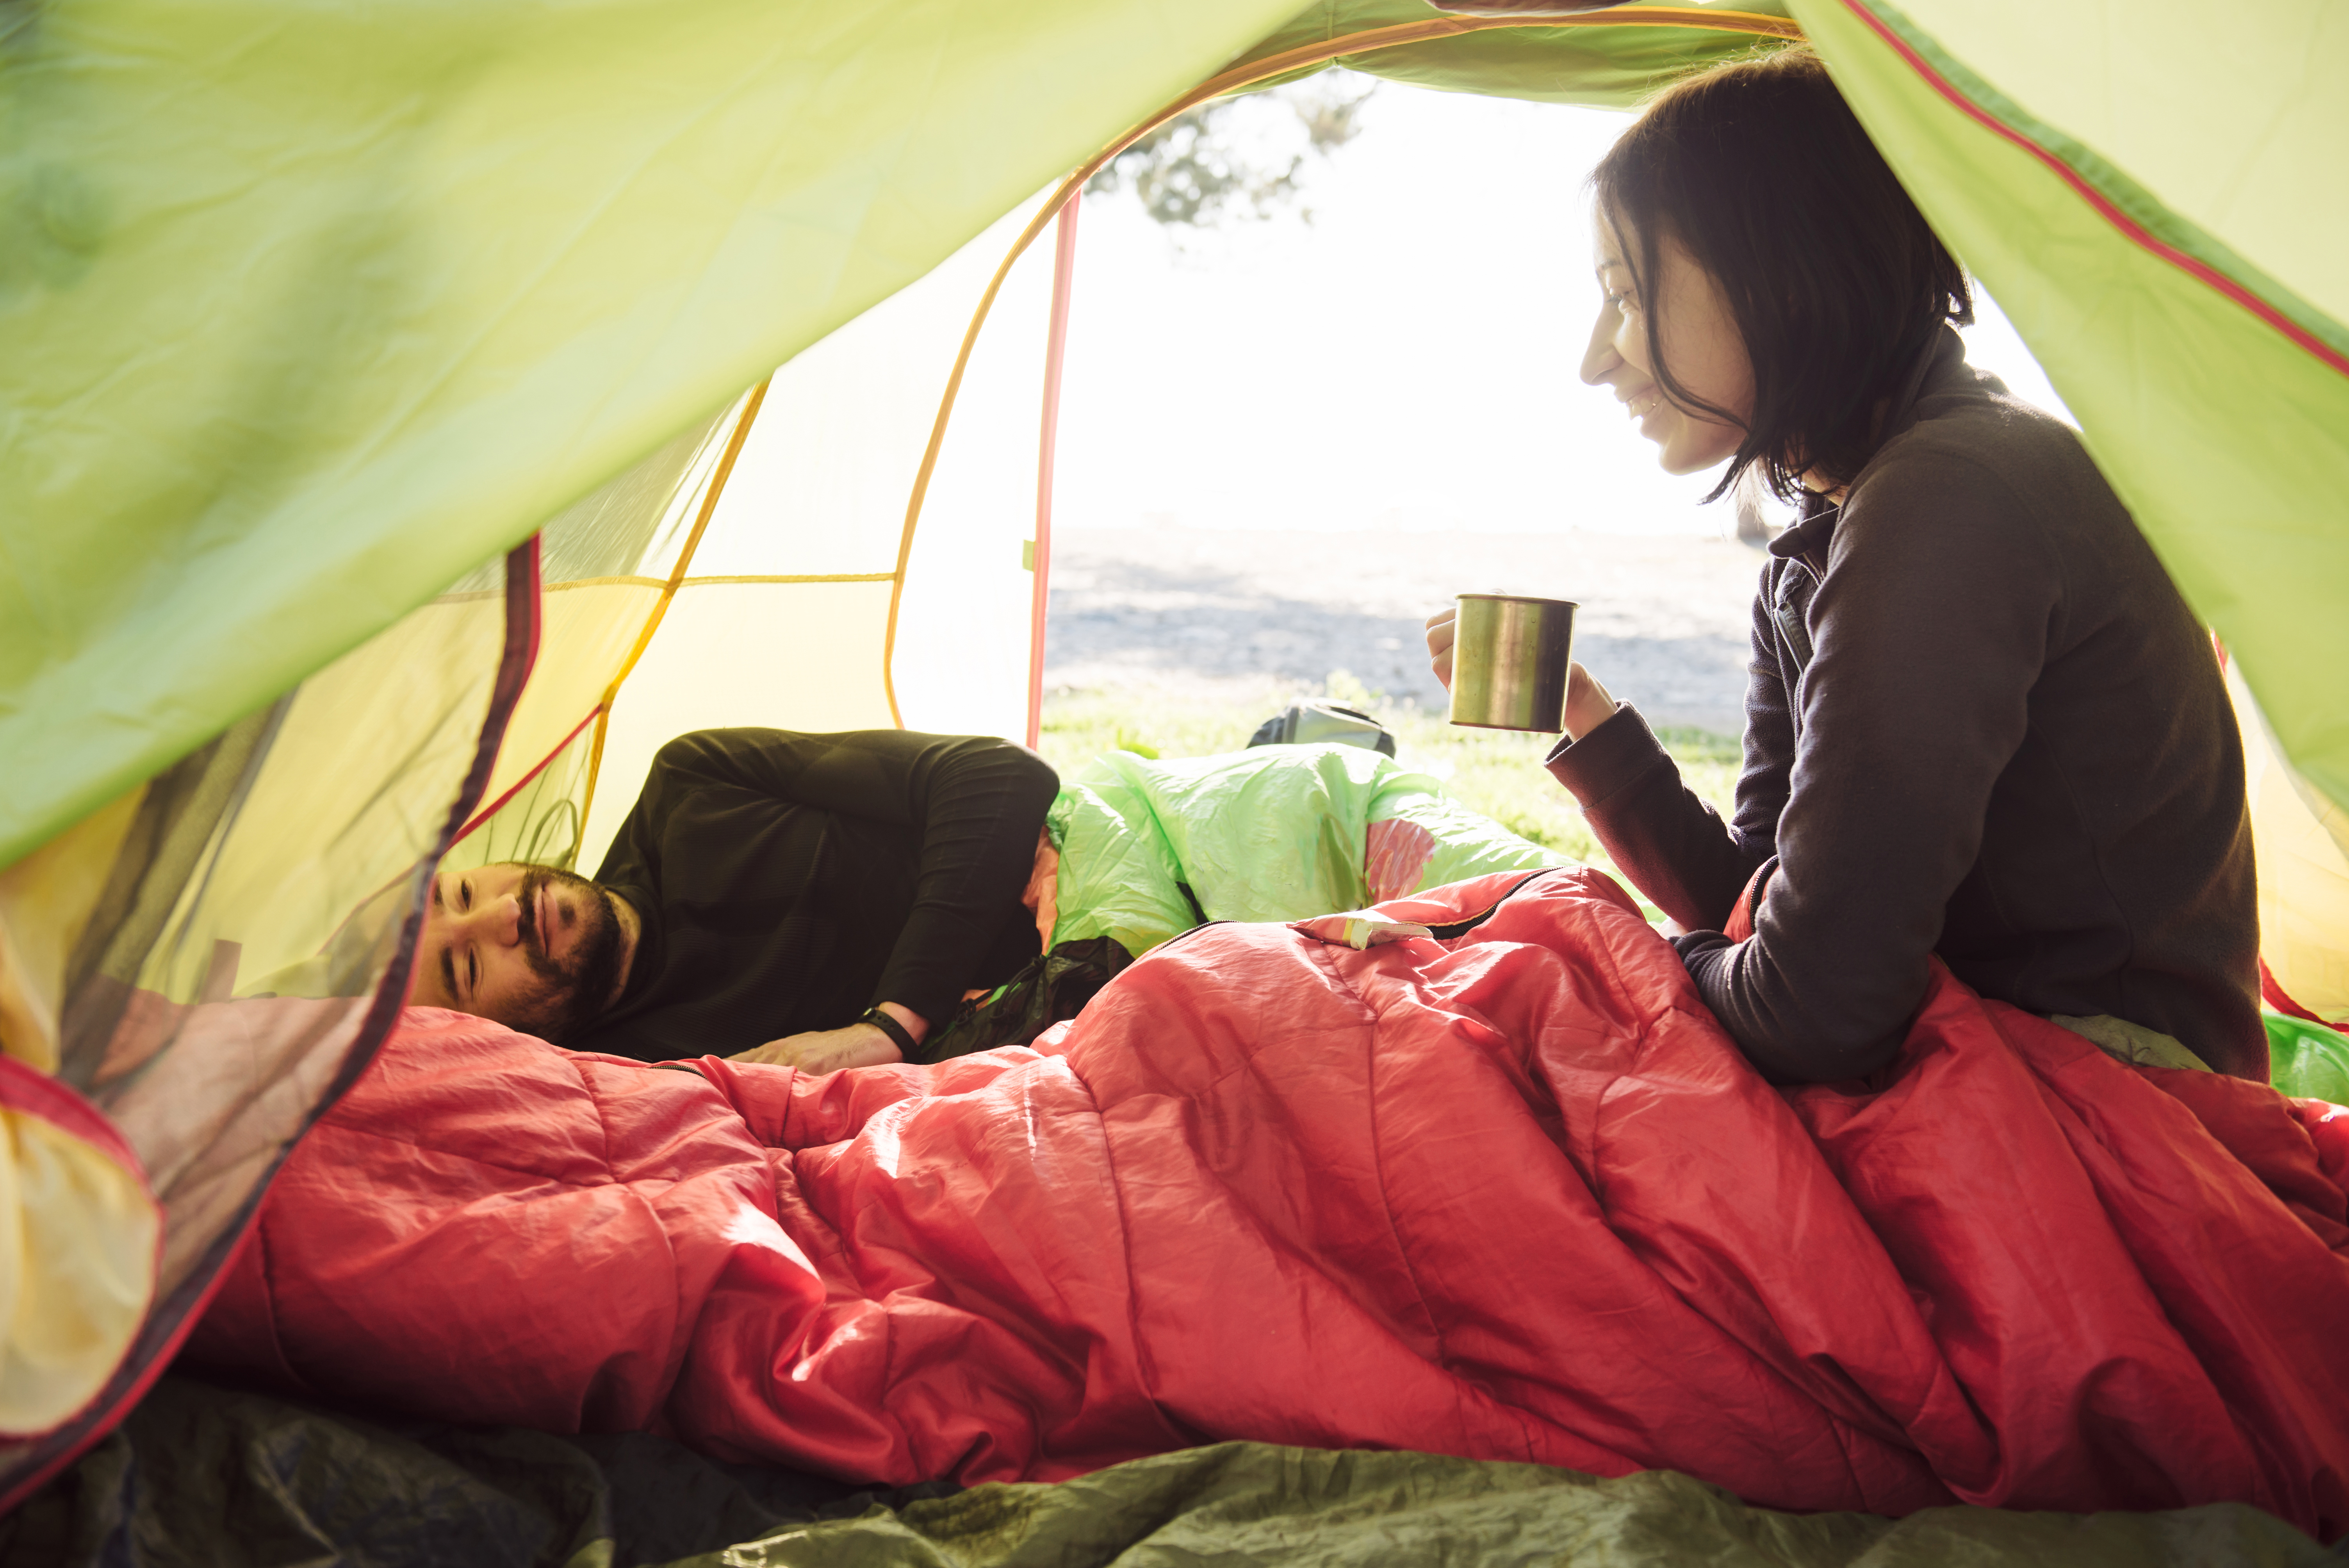 Woman in a red sleeping bag sitting up in her tent drinking from a mug